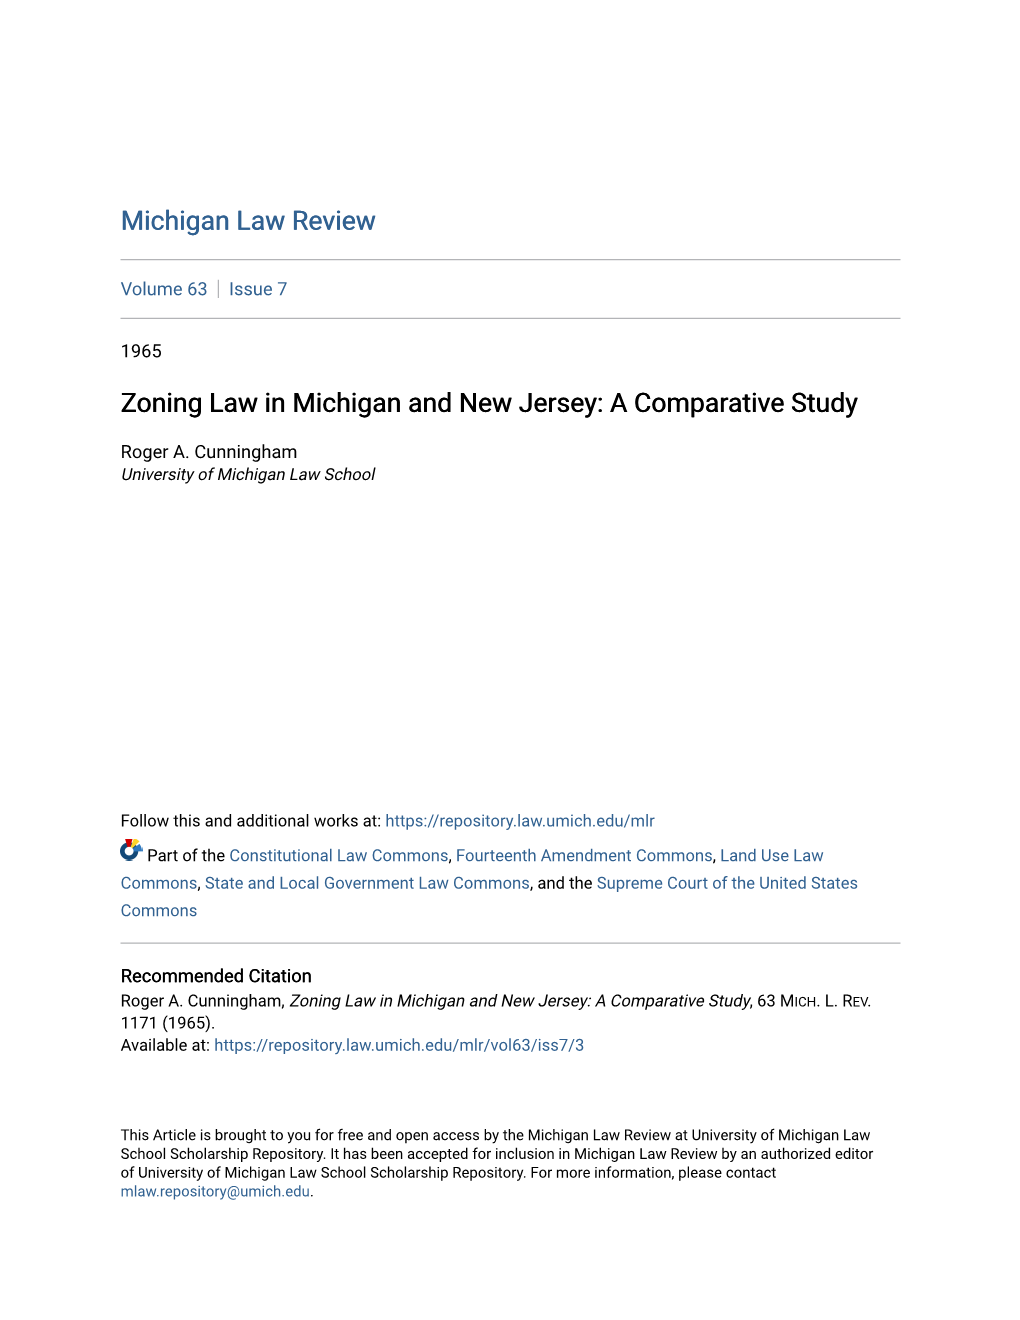 Zoning Law in Michigan and New Jersey: a Comparative Study